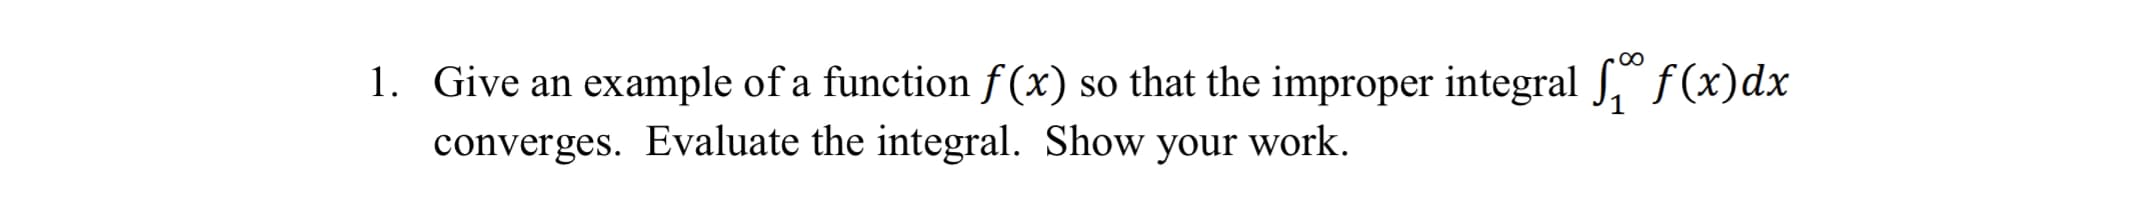 1. Give an example of a function f (x) so that the improper integral " f(x)dx
converges. Evaluate the integral. Show your work.
